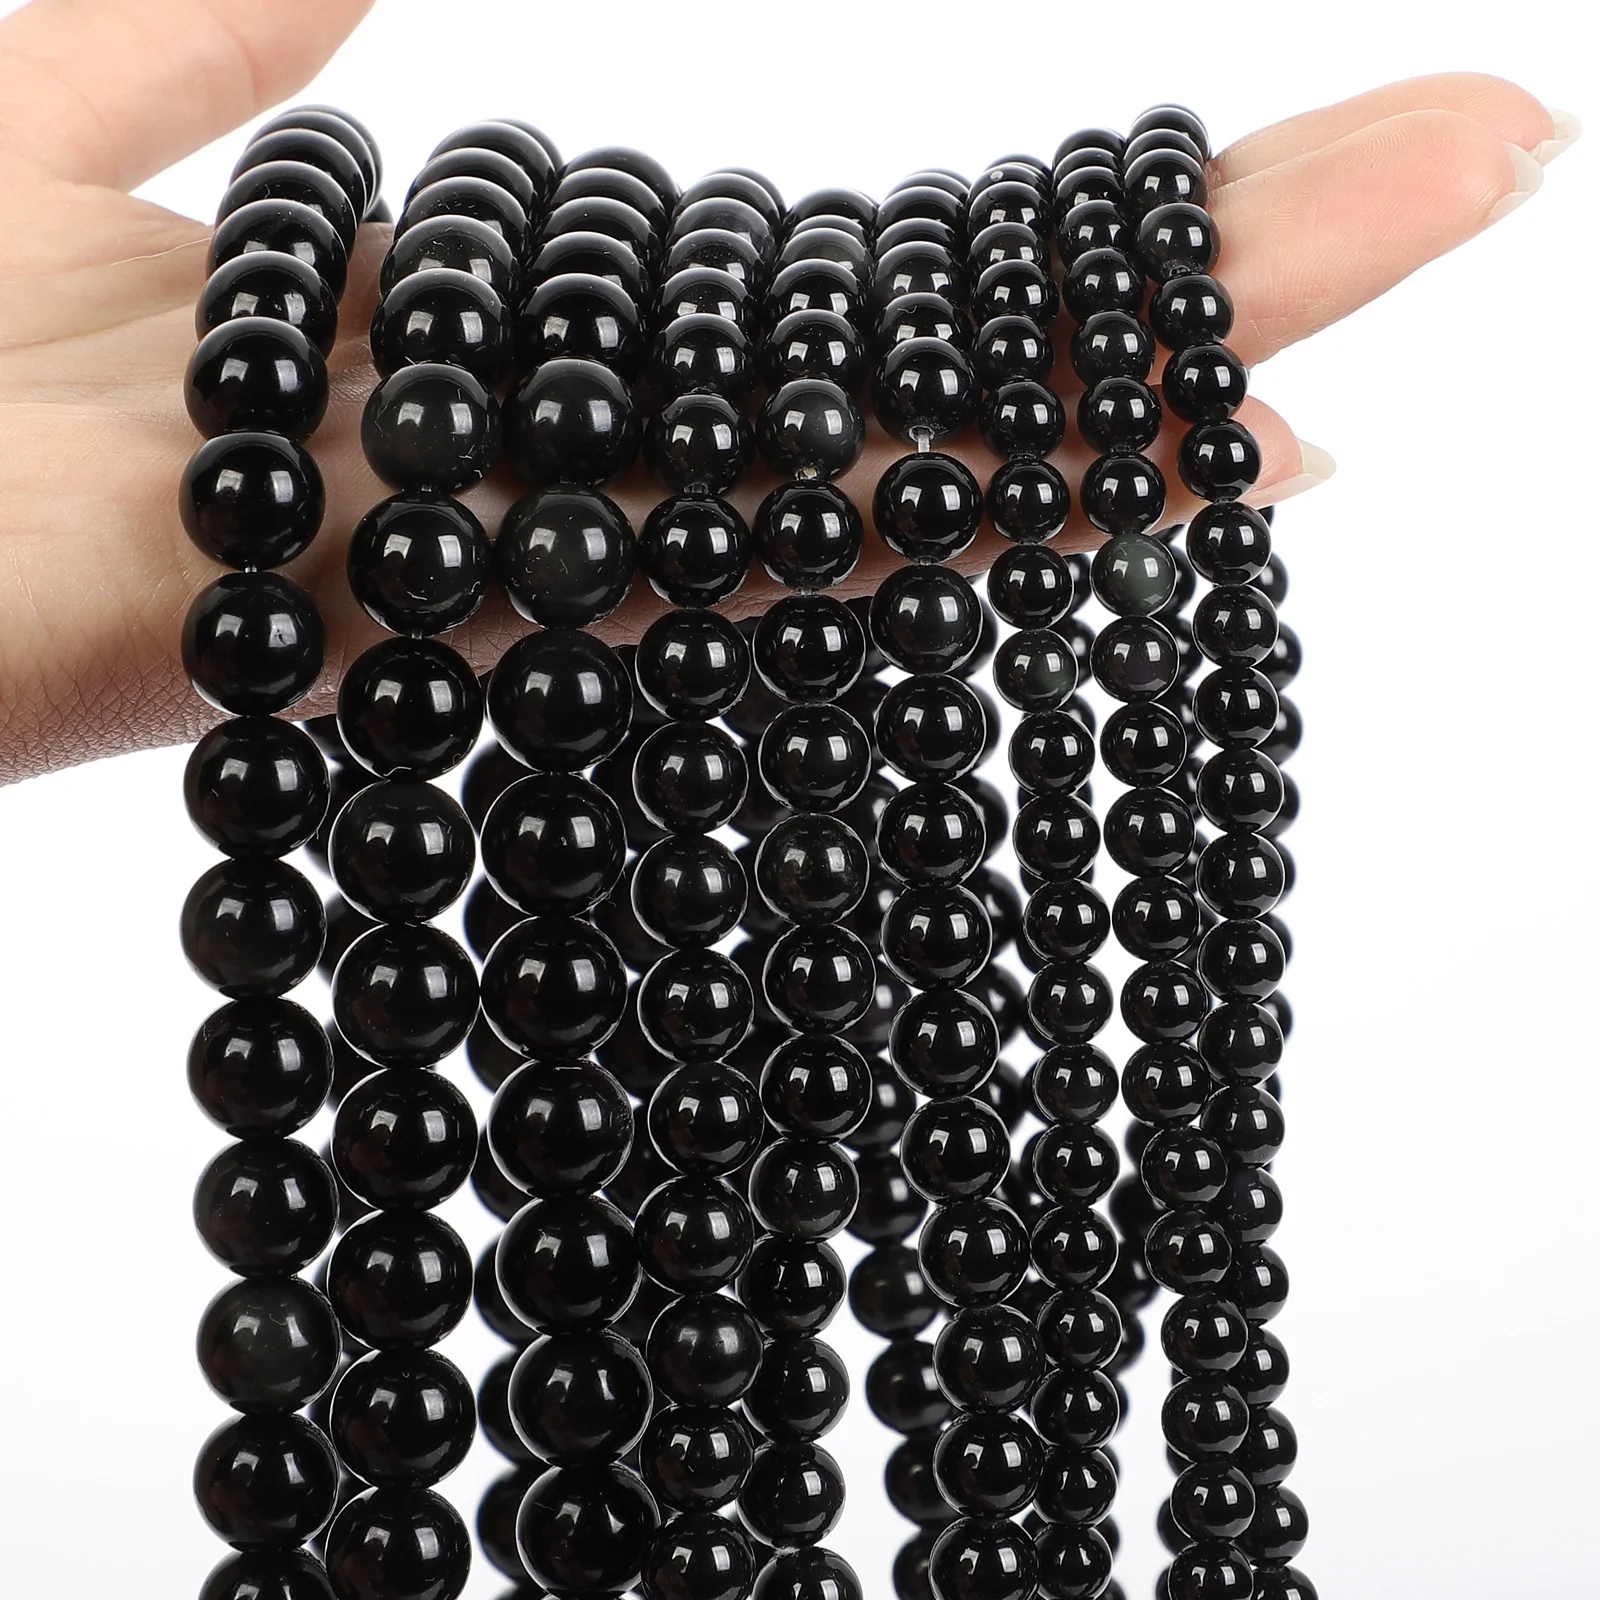 Smooth Natural Stone Beads Black Obsidian Round Loose Spacer Bead For Jewelry Making DIY Charm Bracelets Necklace Accessories